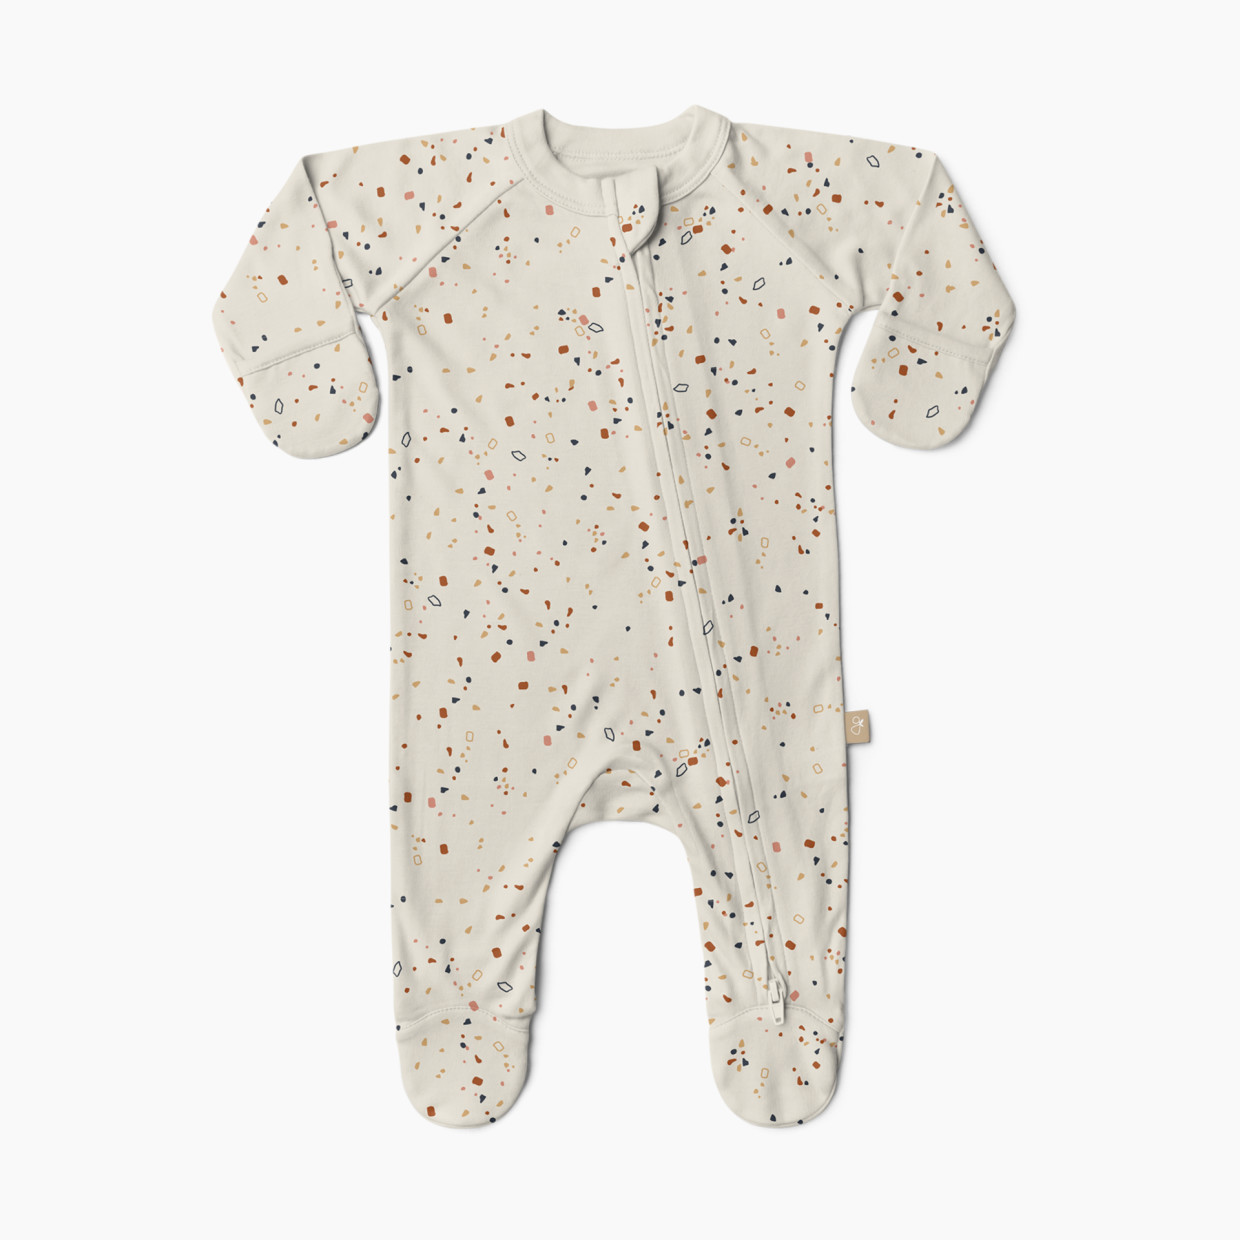 Goumi Kids x Babylist Grow With You Footie - Loose Fit - Terrazzo, 3-6 M.